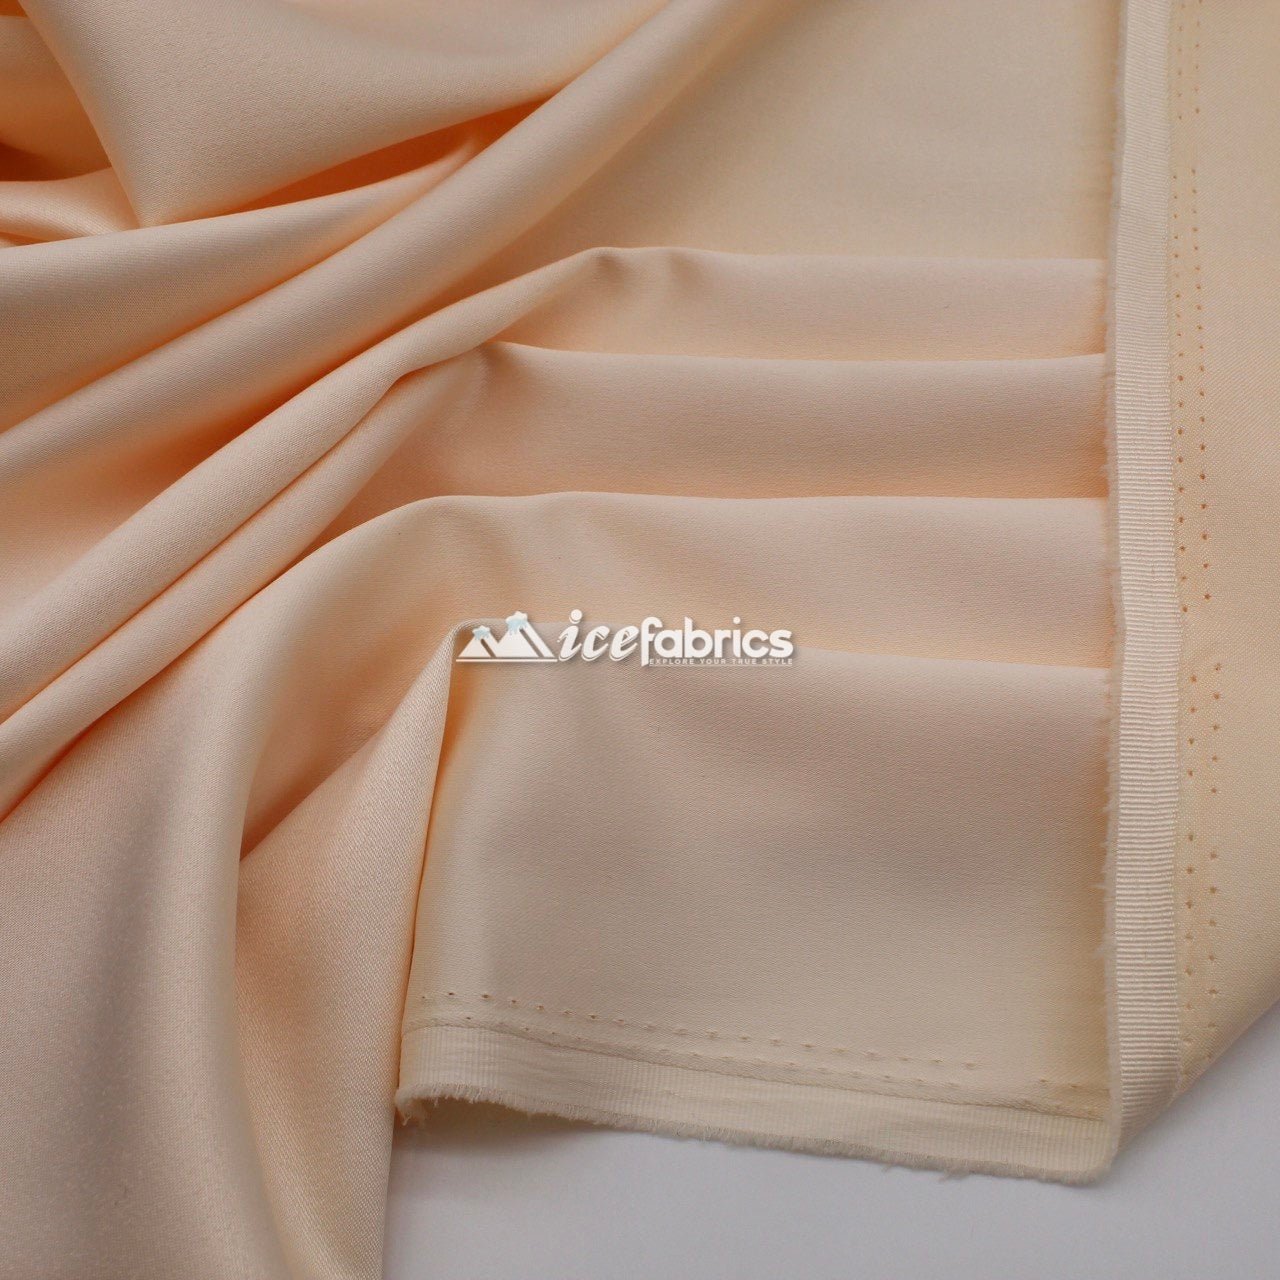 Armani Thick Solid Color Silky Stretch Satin Fabric Sold By The YardSatin FabricICE FABRICSICE FABRICSBlushArmani Thick Solid Color Silky Stretch Satin Fabric Sold By The Yard ICE FABRICS Blush